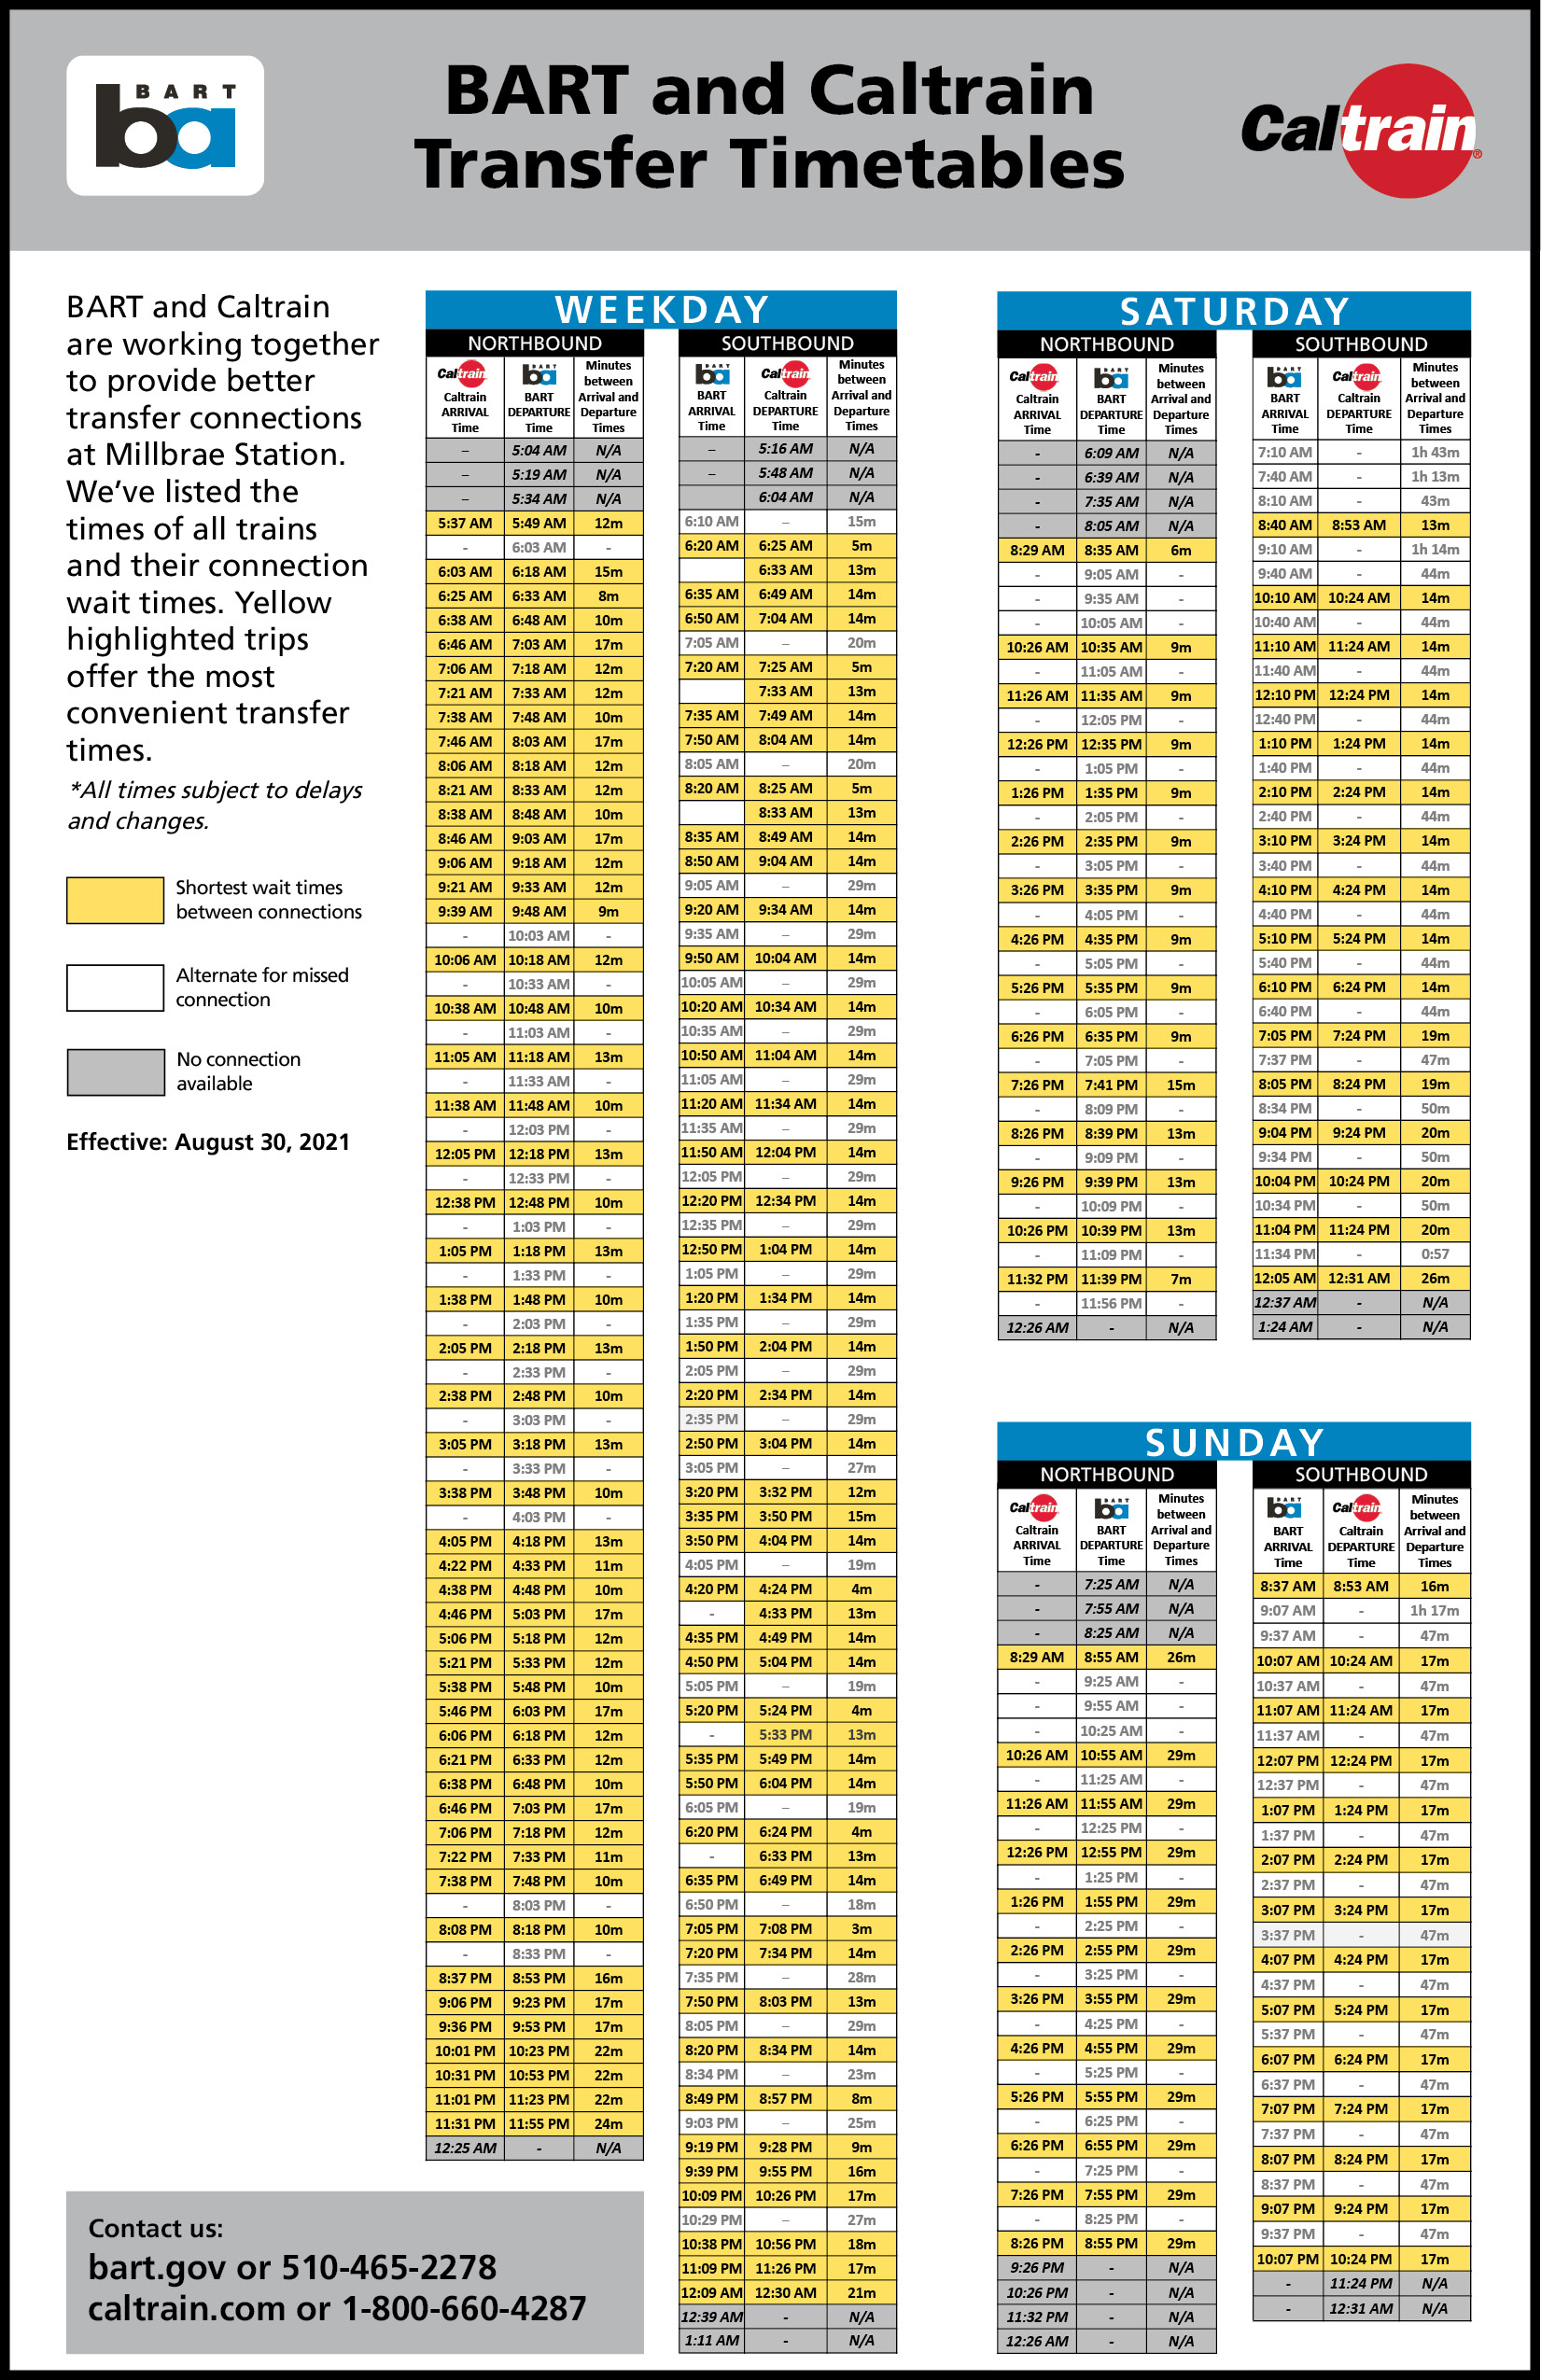 BART and Caltrain release transfer timetable Bay Area Rapid Transit